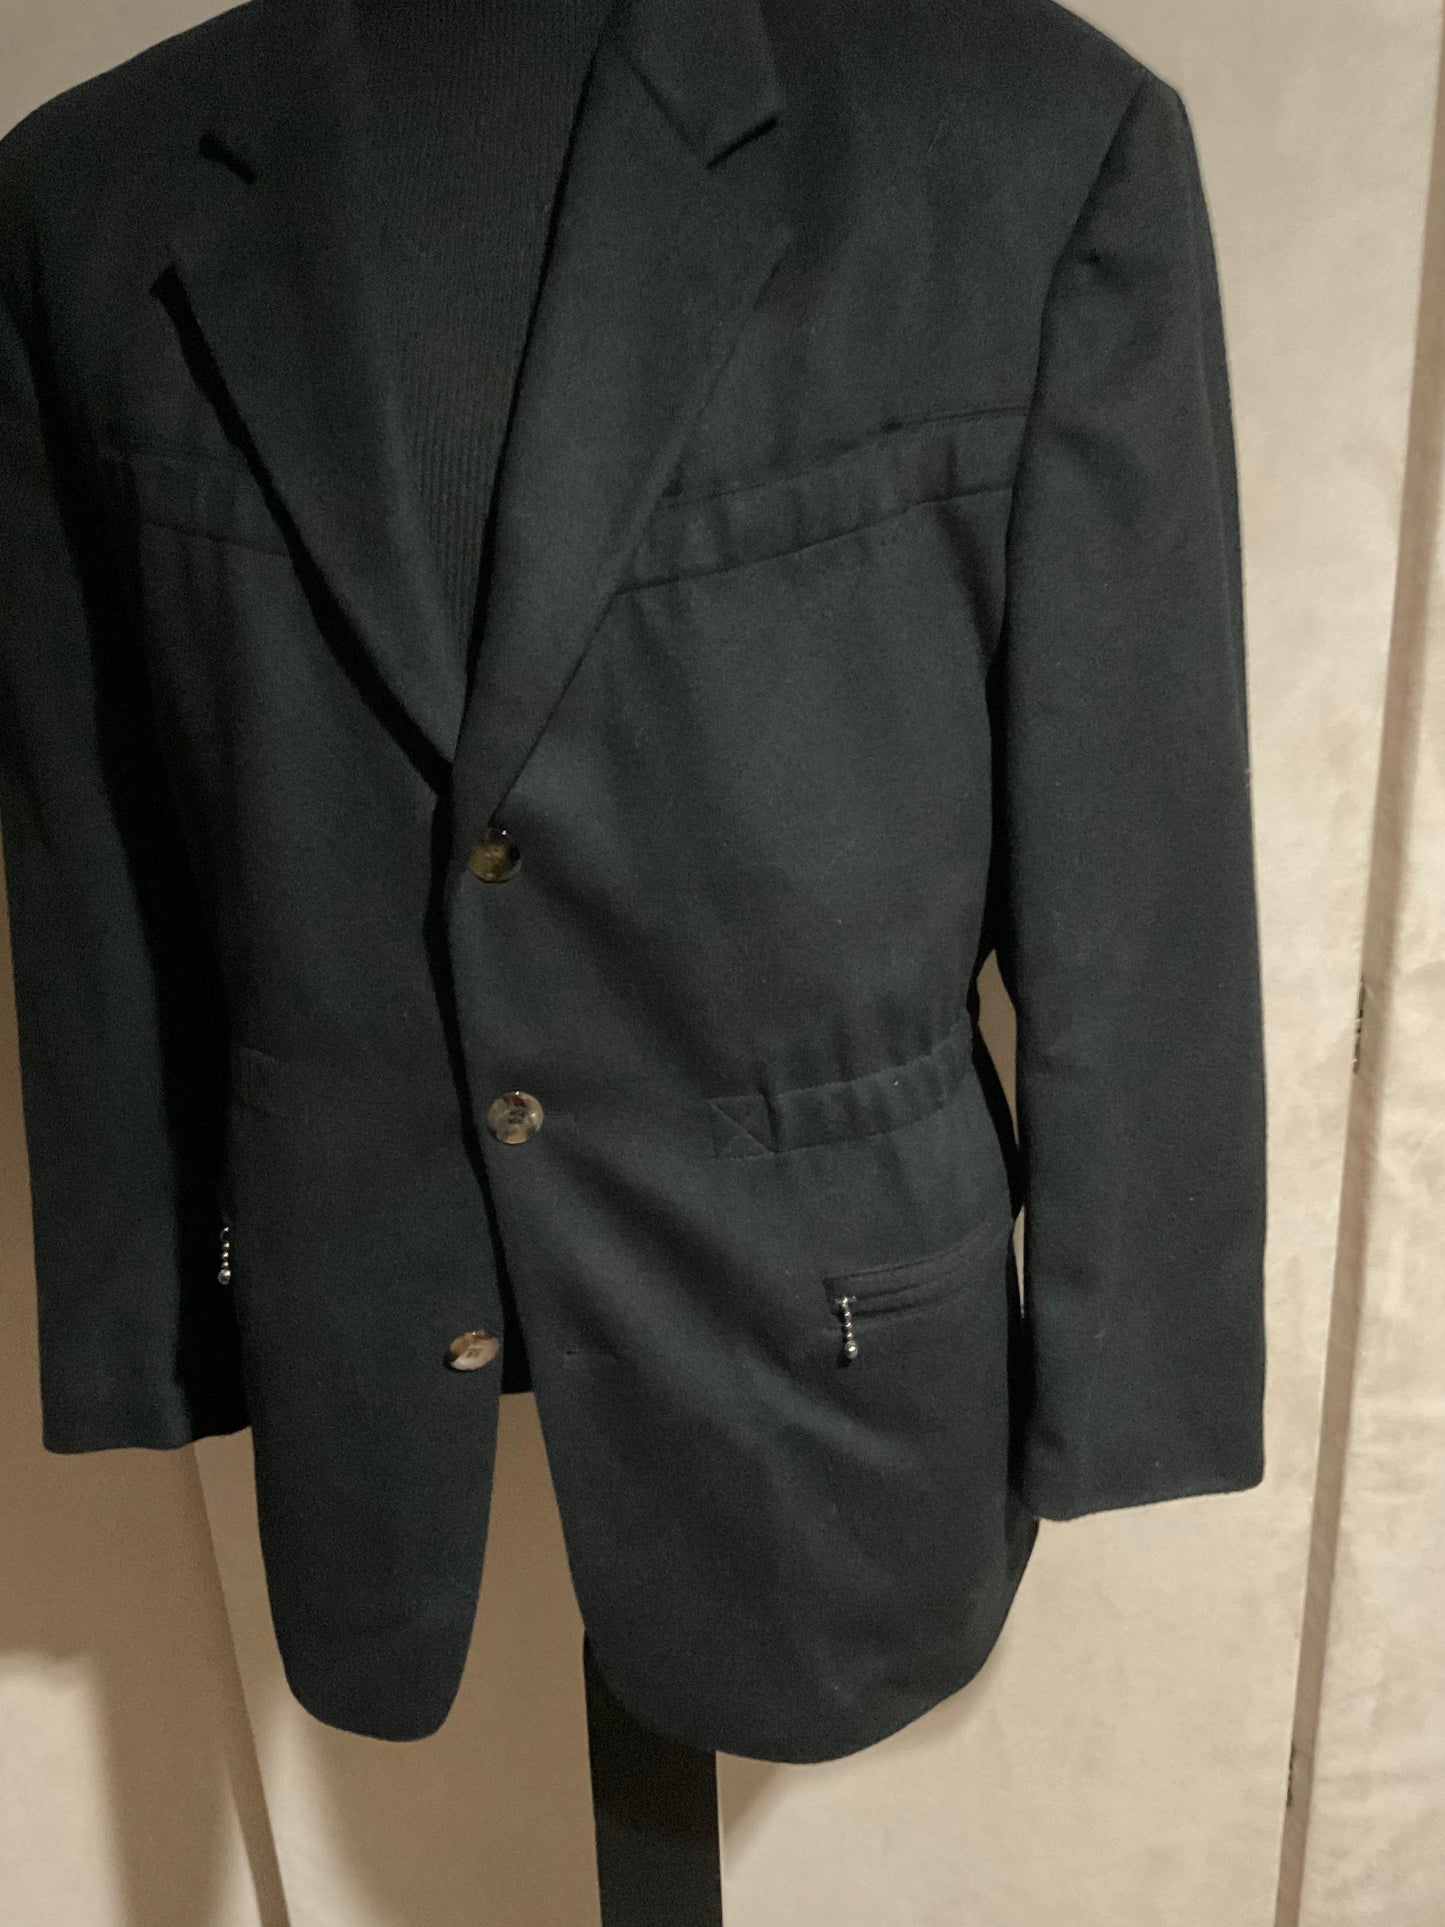 R P JACKET / BLACK CASHMERE & WOOL / MEDIUM - 40 / NEW / MADE IN GERMANY